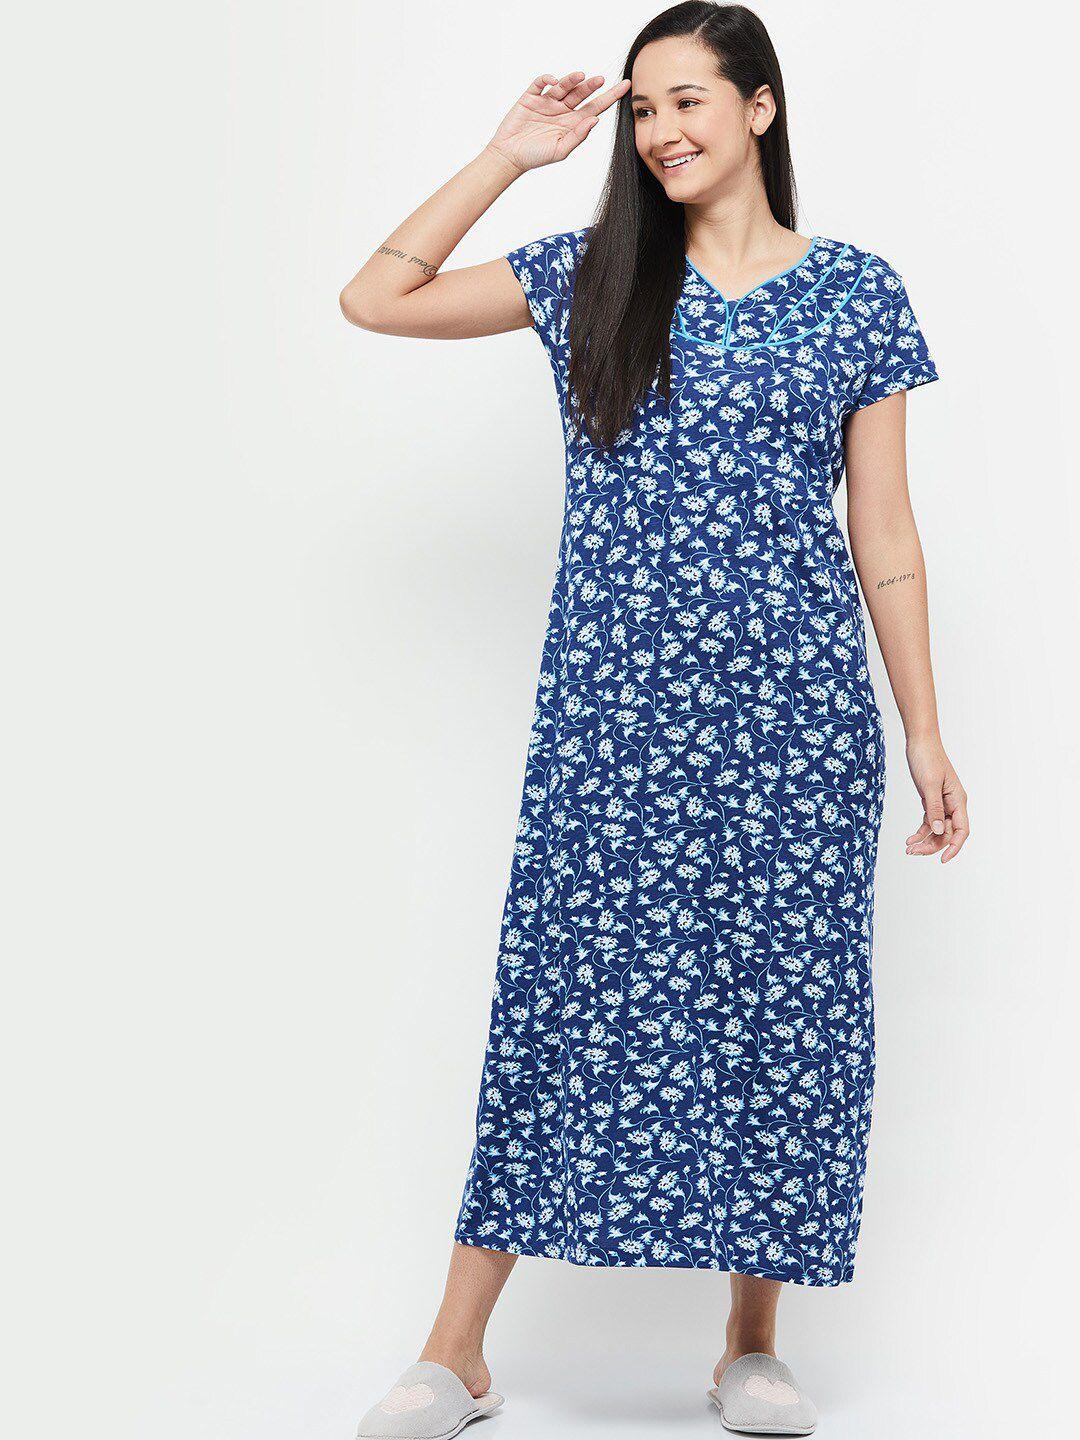 max women navy blue & white floral printed cotton maxi nightdress